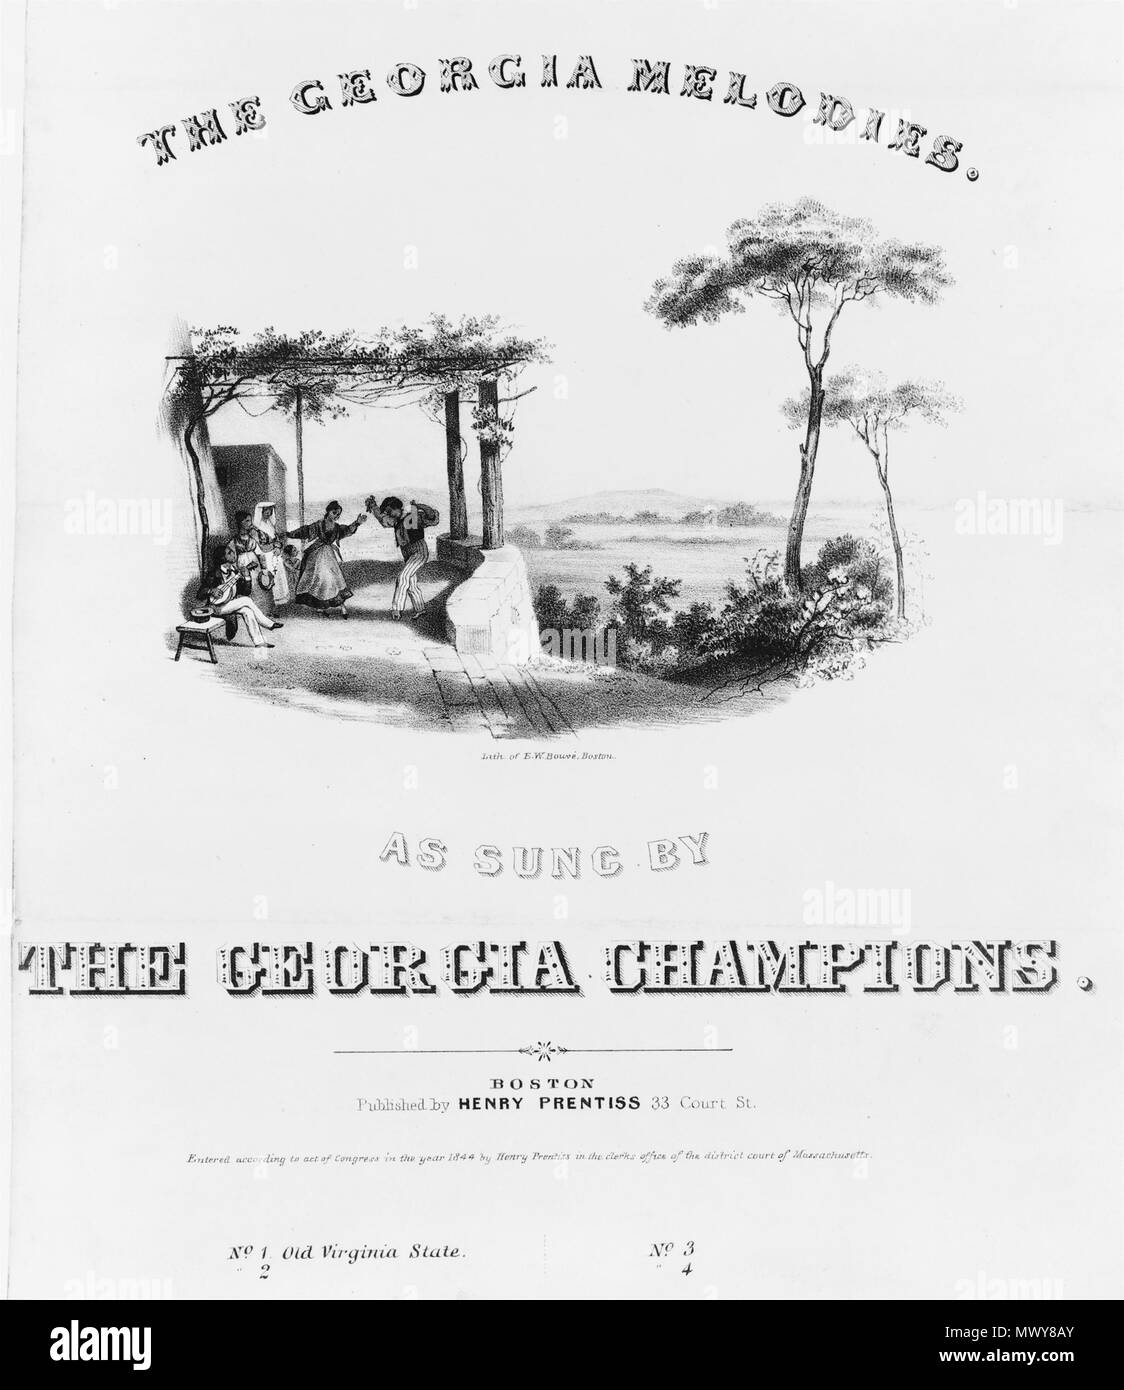 . The Georgia melodies. As sung by the Georgia Champions / Lith. of E.W. Bouve, Boston. MEDIUM: 1 print : lithograph. CREATED/PUBLISHED: Boston : published by Henry Prentiss, c1844. CREATOR: Bouve, Ephraim W., 1817-1897, artist. REPOSITORY: Library of Congress, Prints and Photographs Division, Washington, D.C. 20540 USA . 1844. E.W. Bouvé 7 1844 GeorgiaMelodies byEWBouve HPrentiss Boston LC Stock Photo